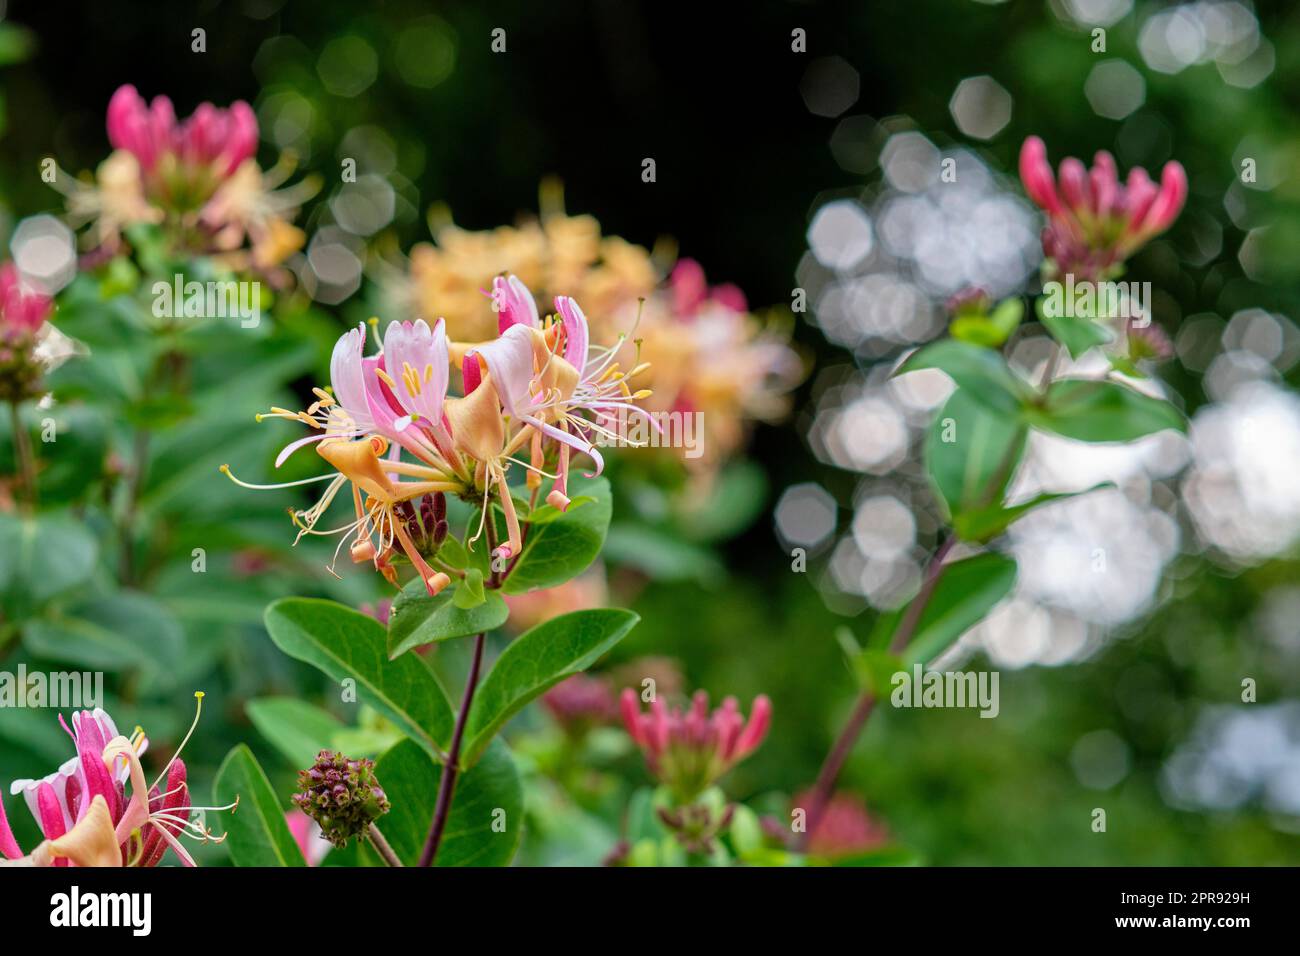 European honeysuckle flower blooming in a garden. Closeup details of colorful flower petals outdoor in summer. Beautiful vibrant lonicera periclymenum growing in a backyard or park in spring season Stock Photo